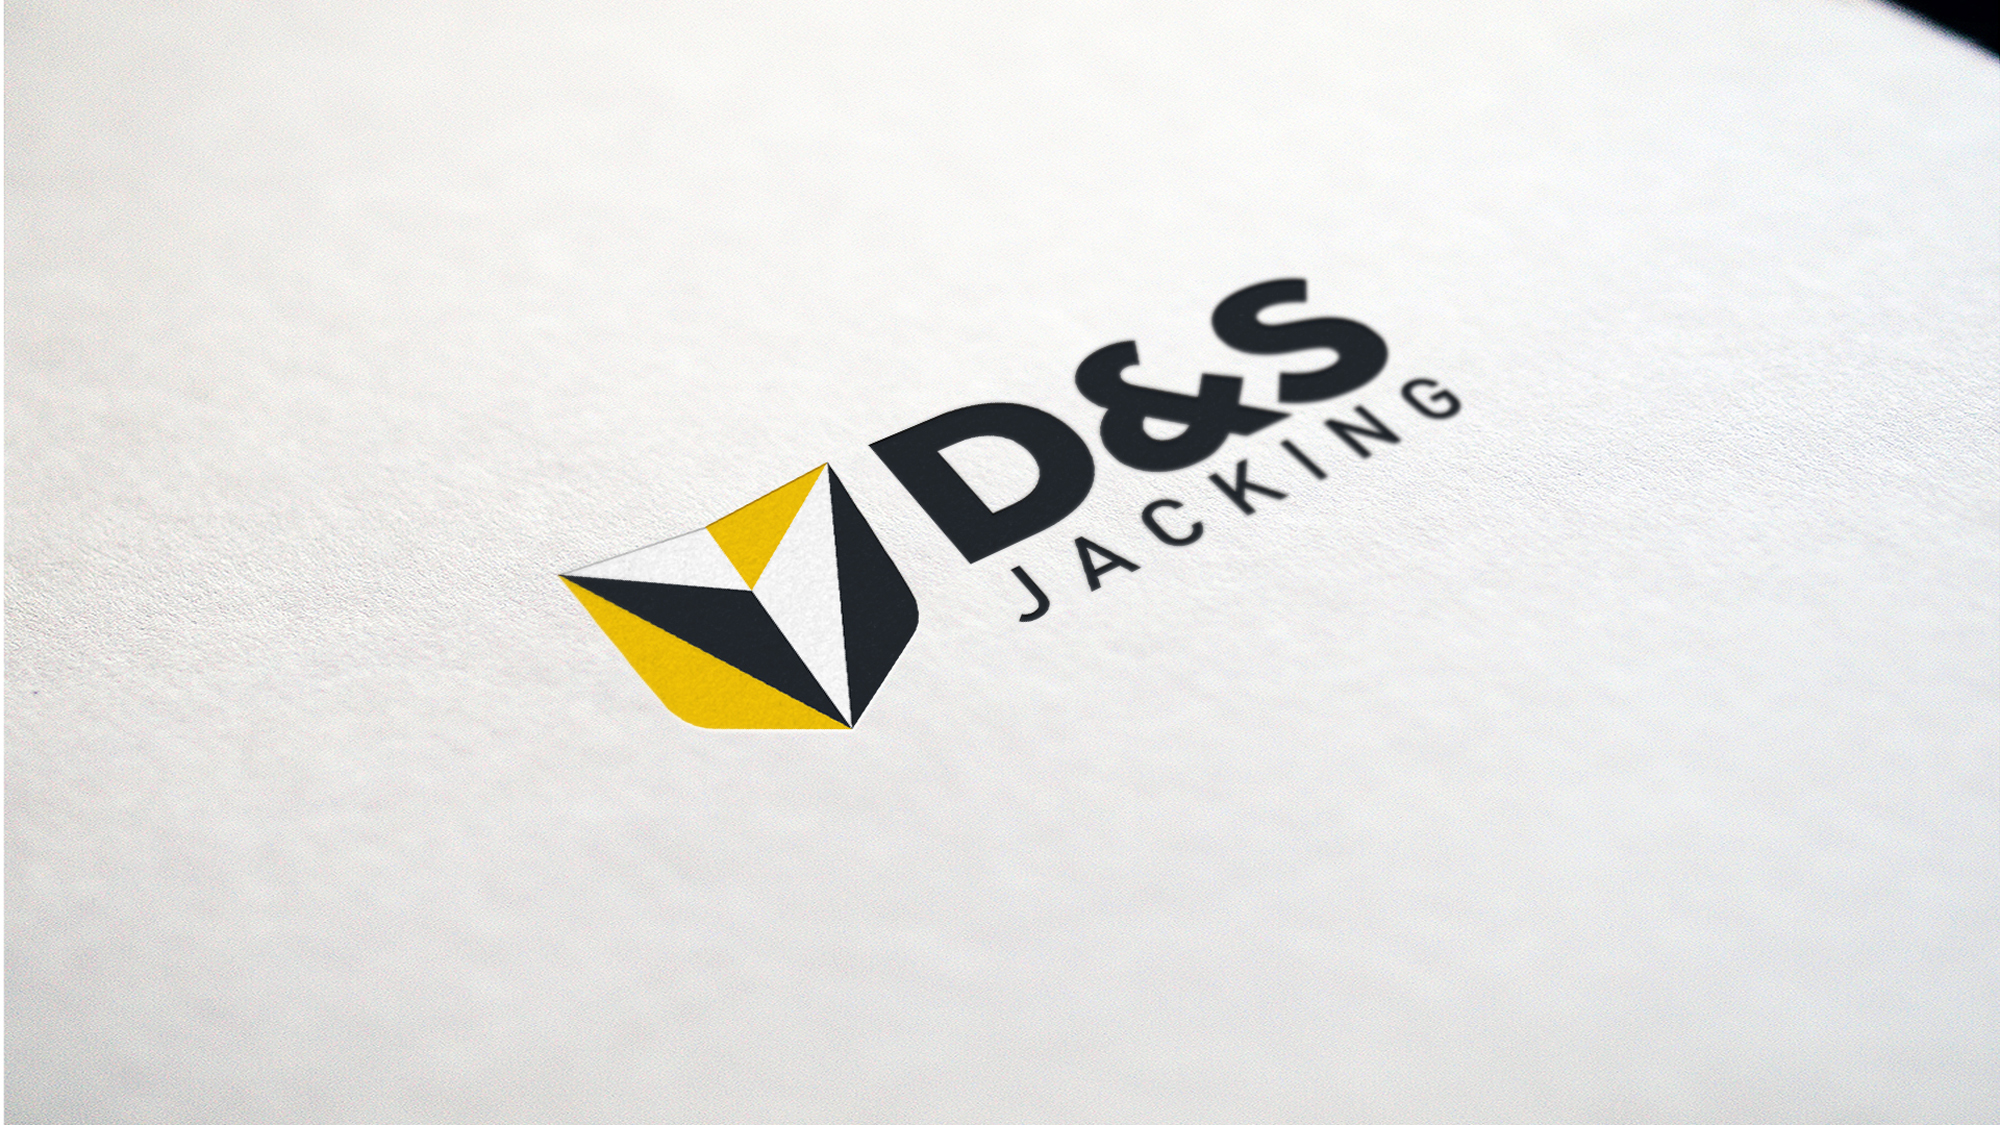 Corporate identity design for D&S jacking by Dutch Fellow